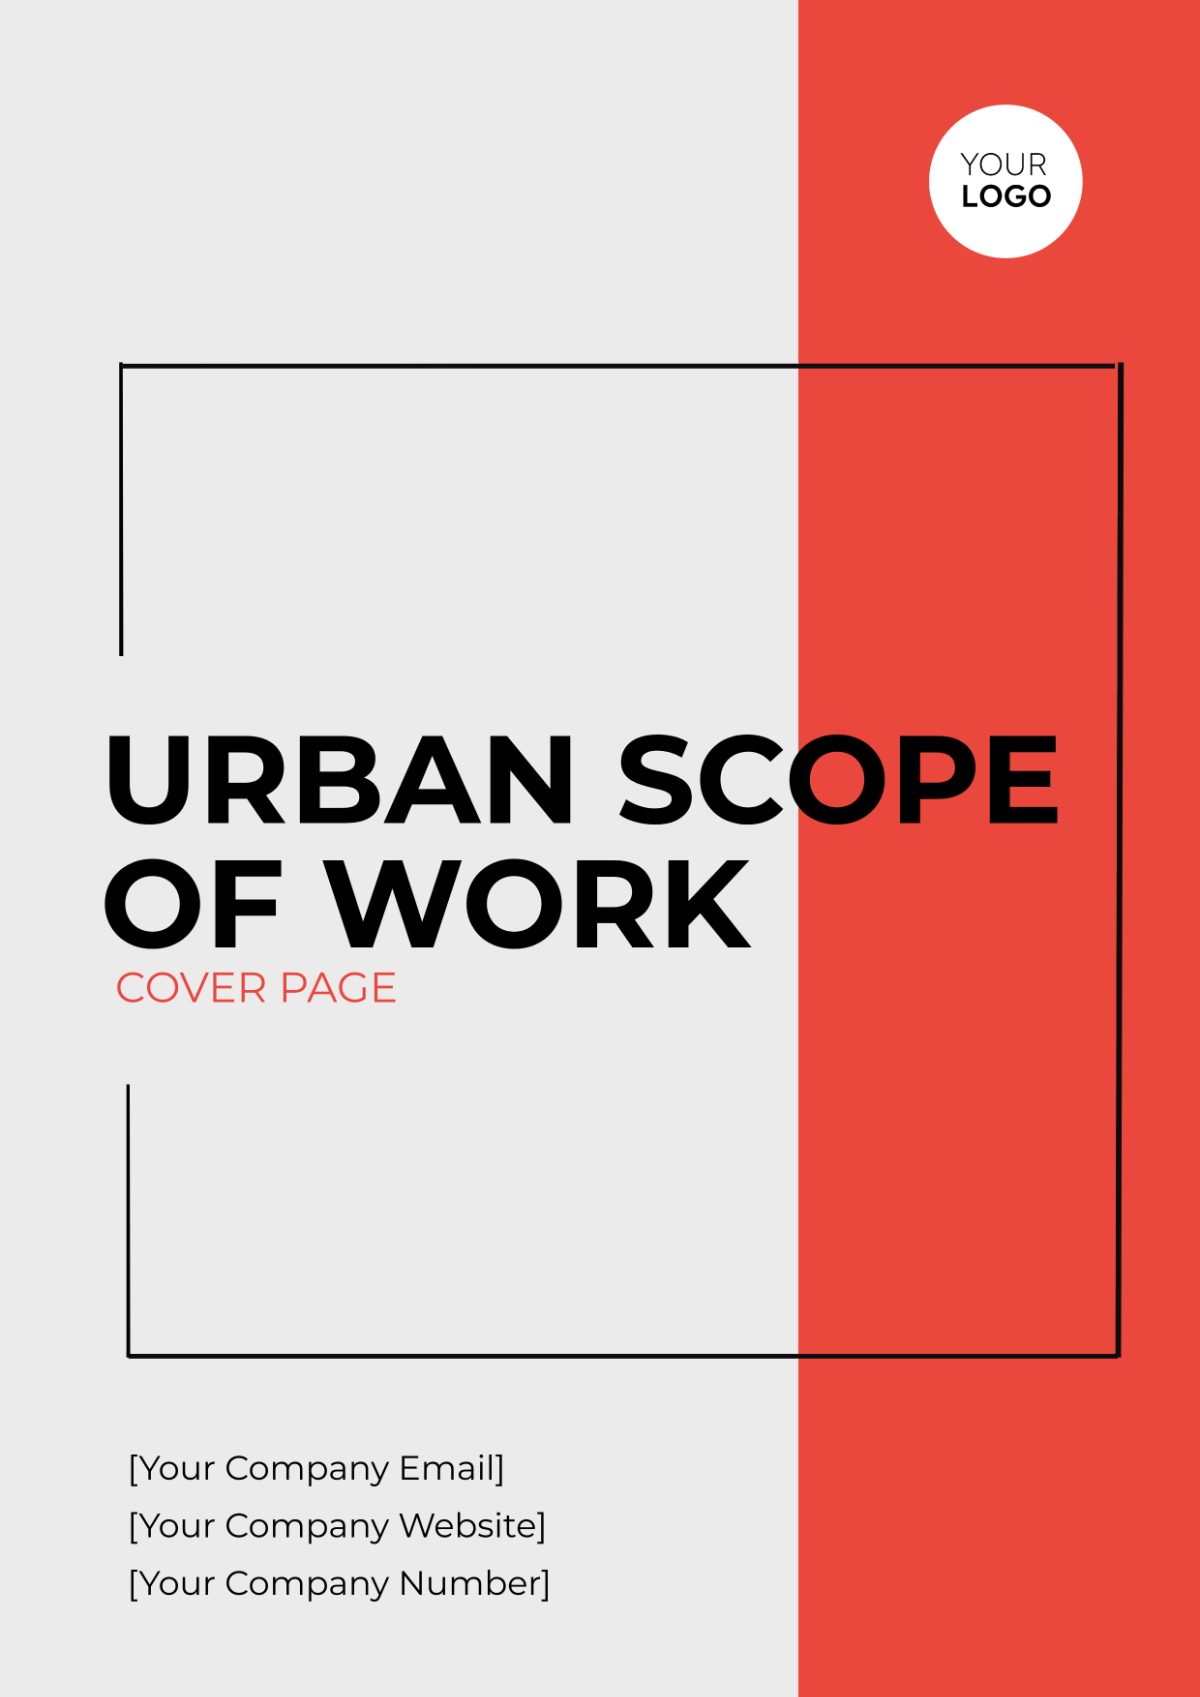 Urban Scope of Work Cover Page